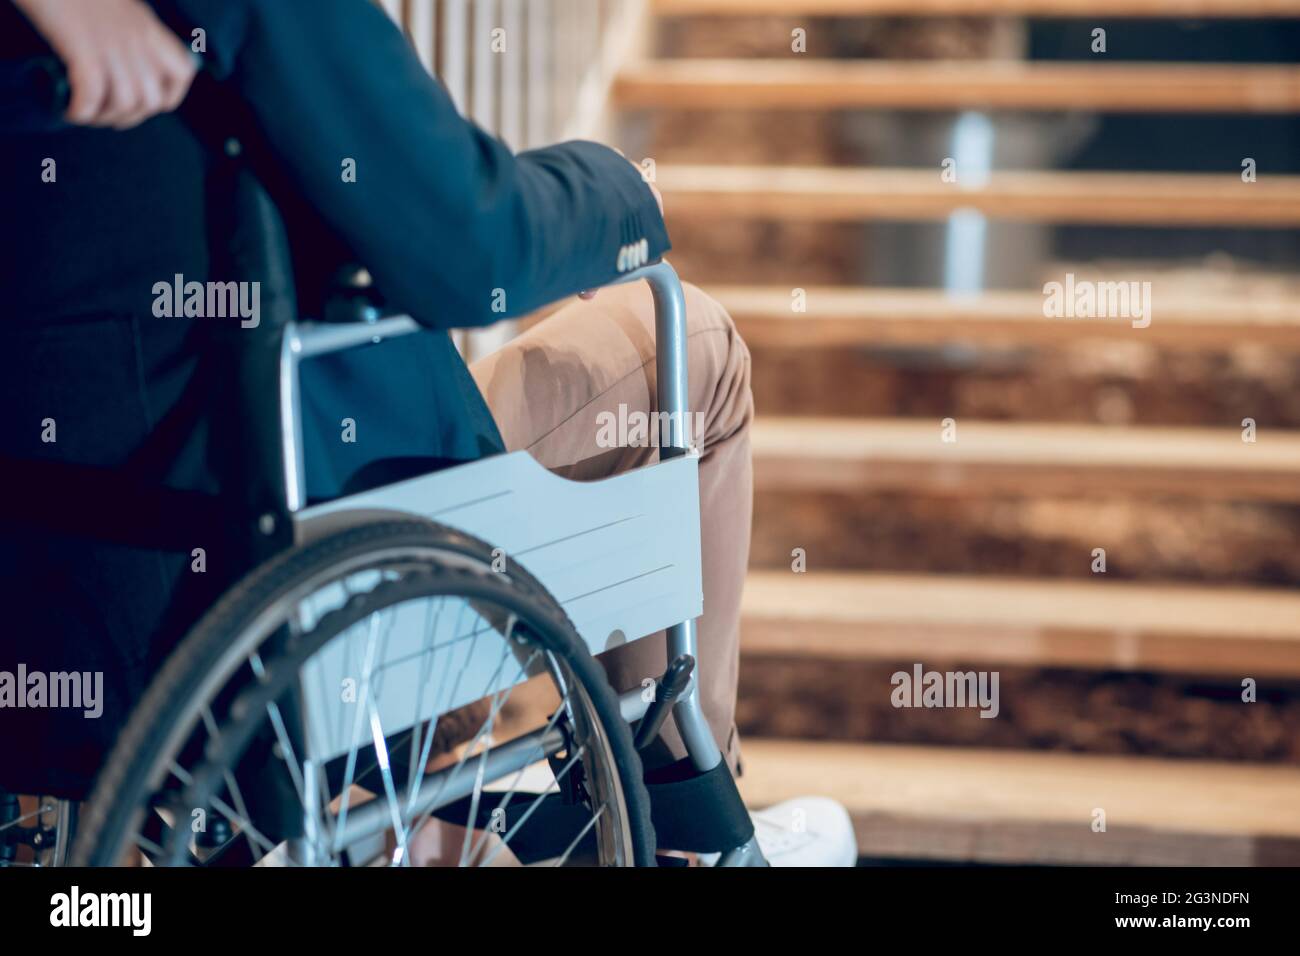 Man in wheelchair stopped near stairs Stock Photo